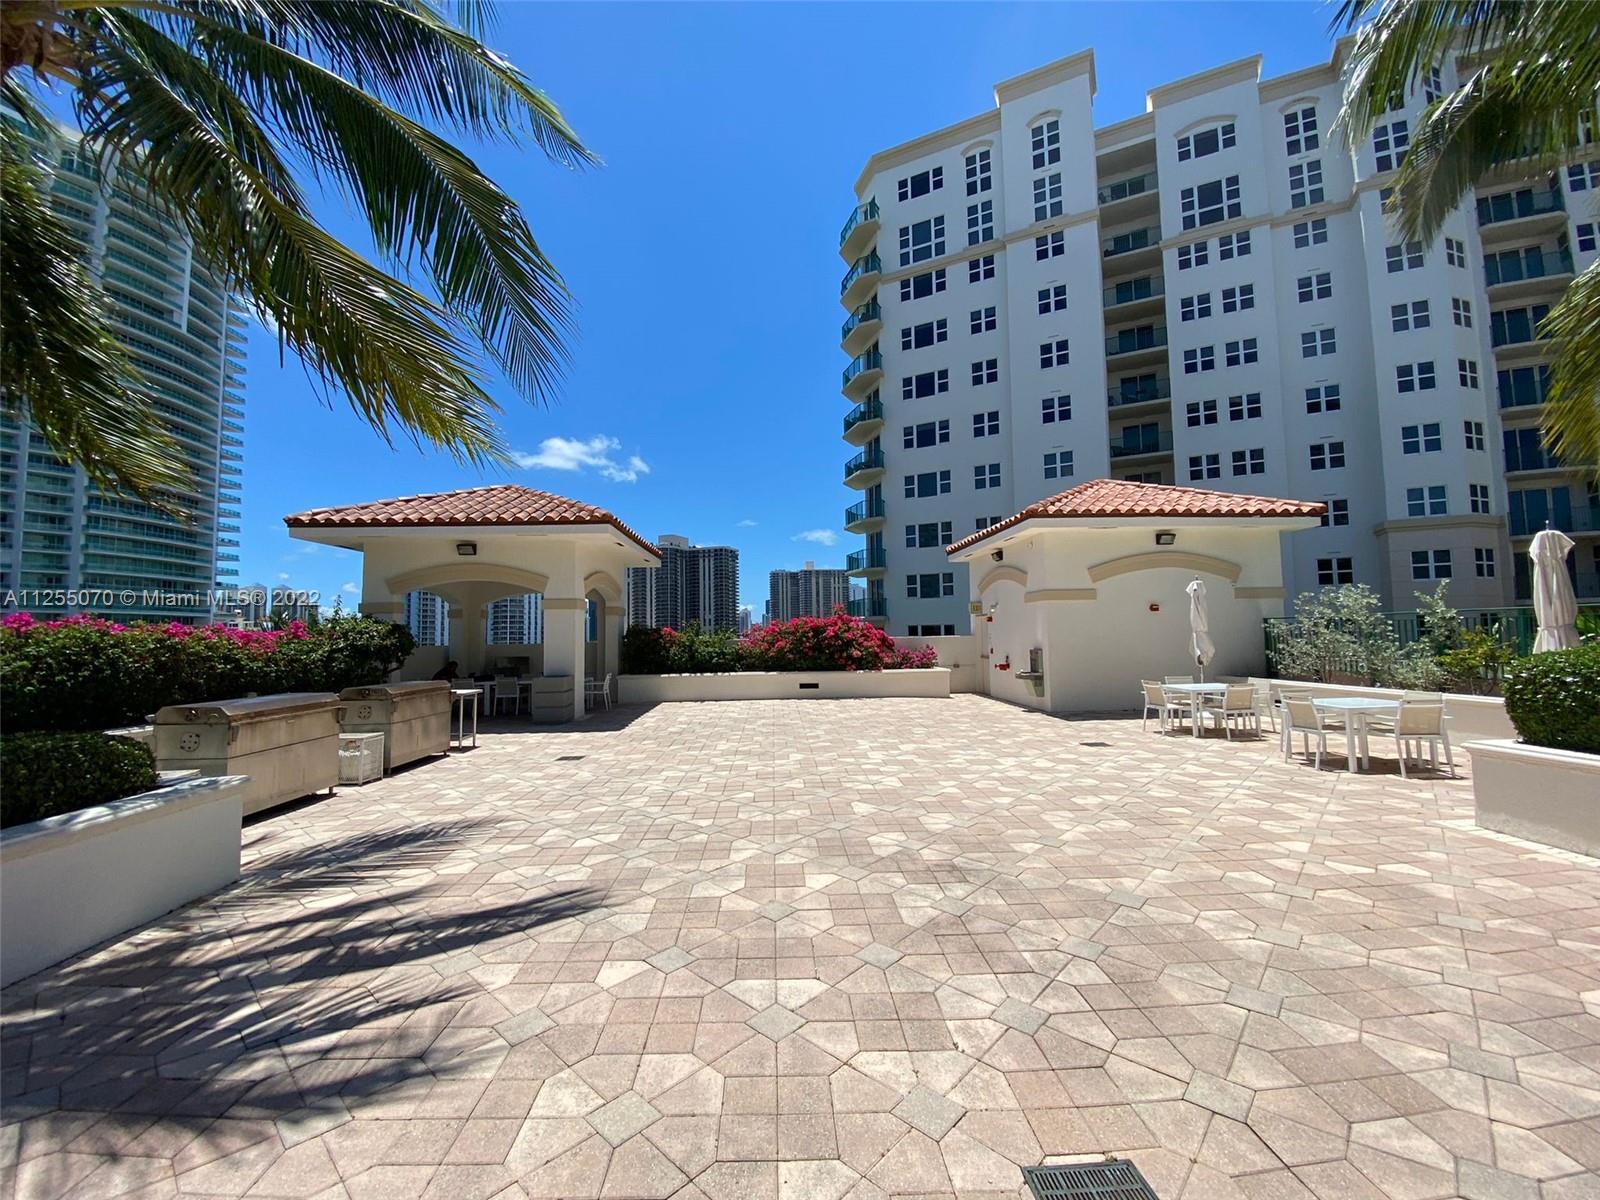 Photo 1 of Turnberry Village So Towe Apt PH18 in Aventura - MLS A11255070